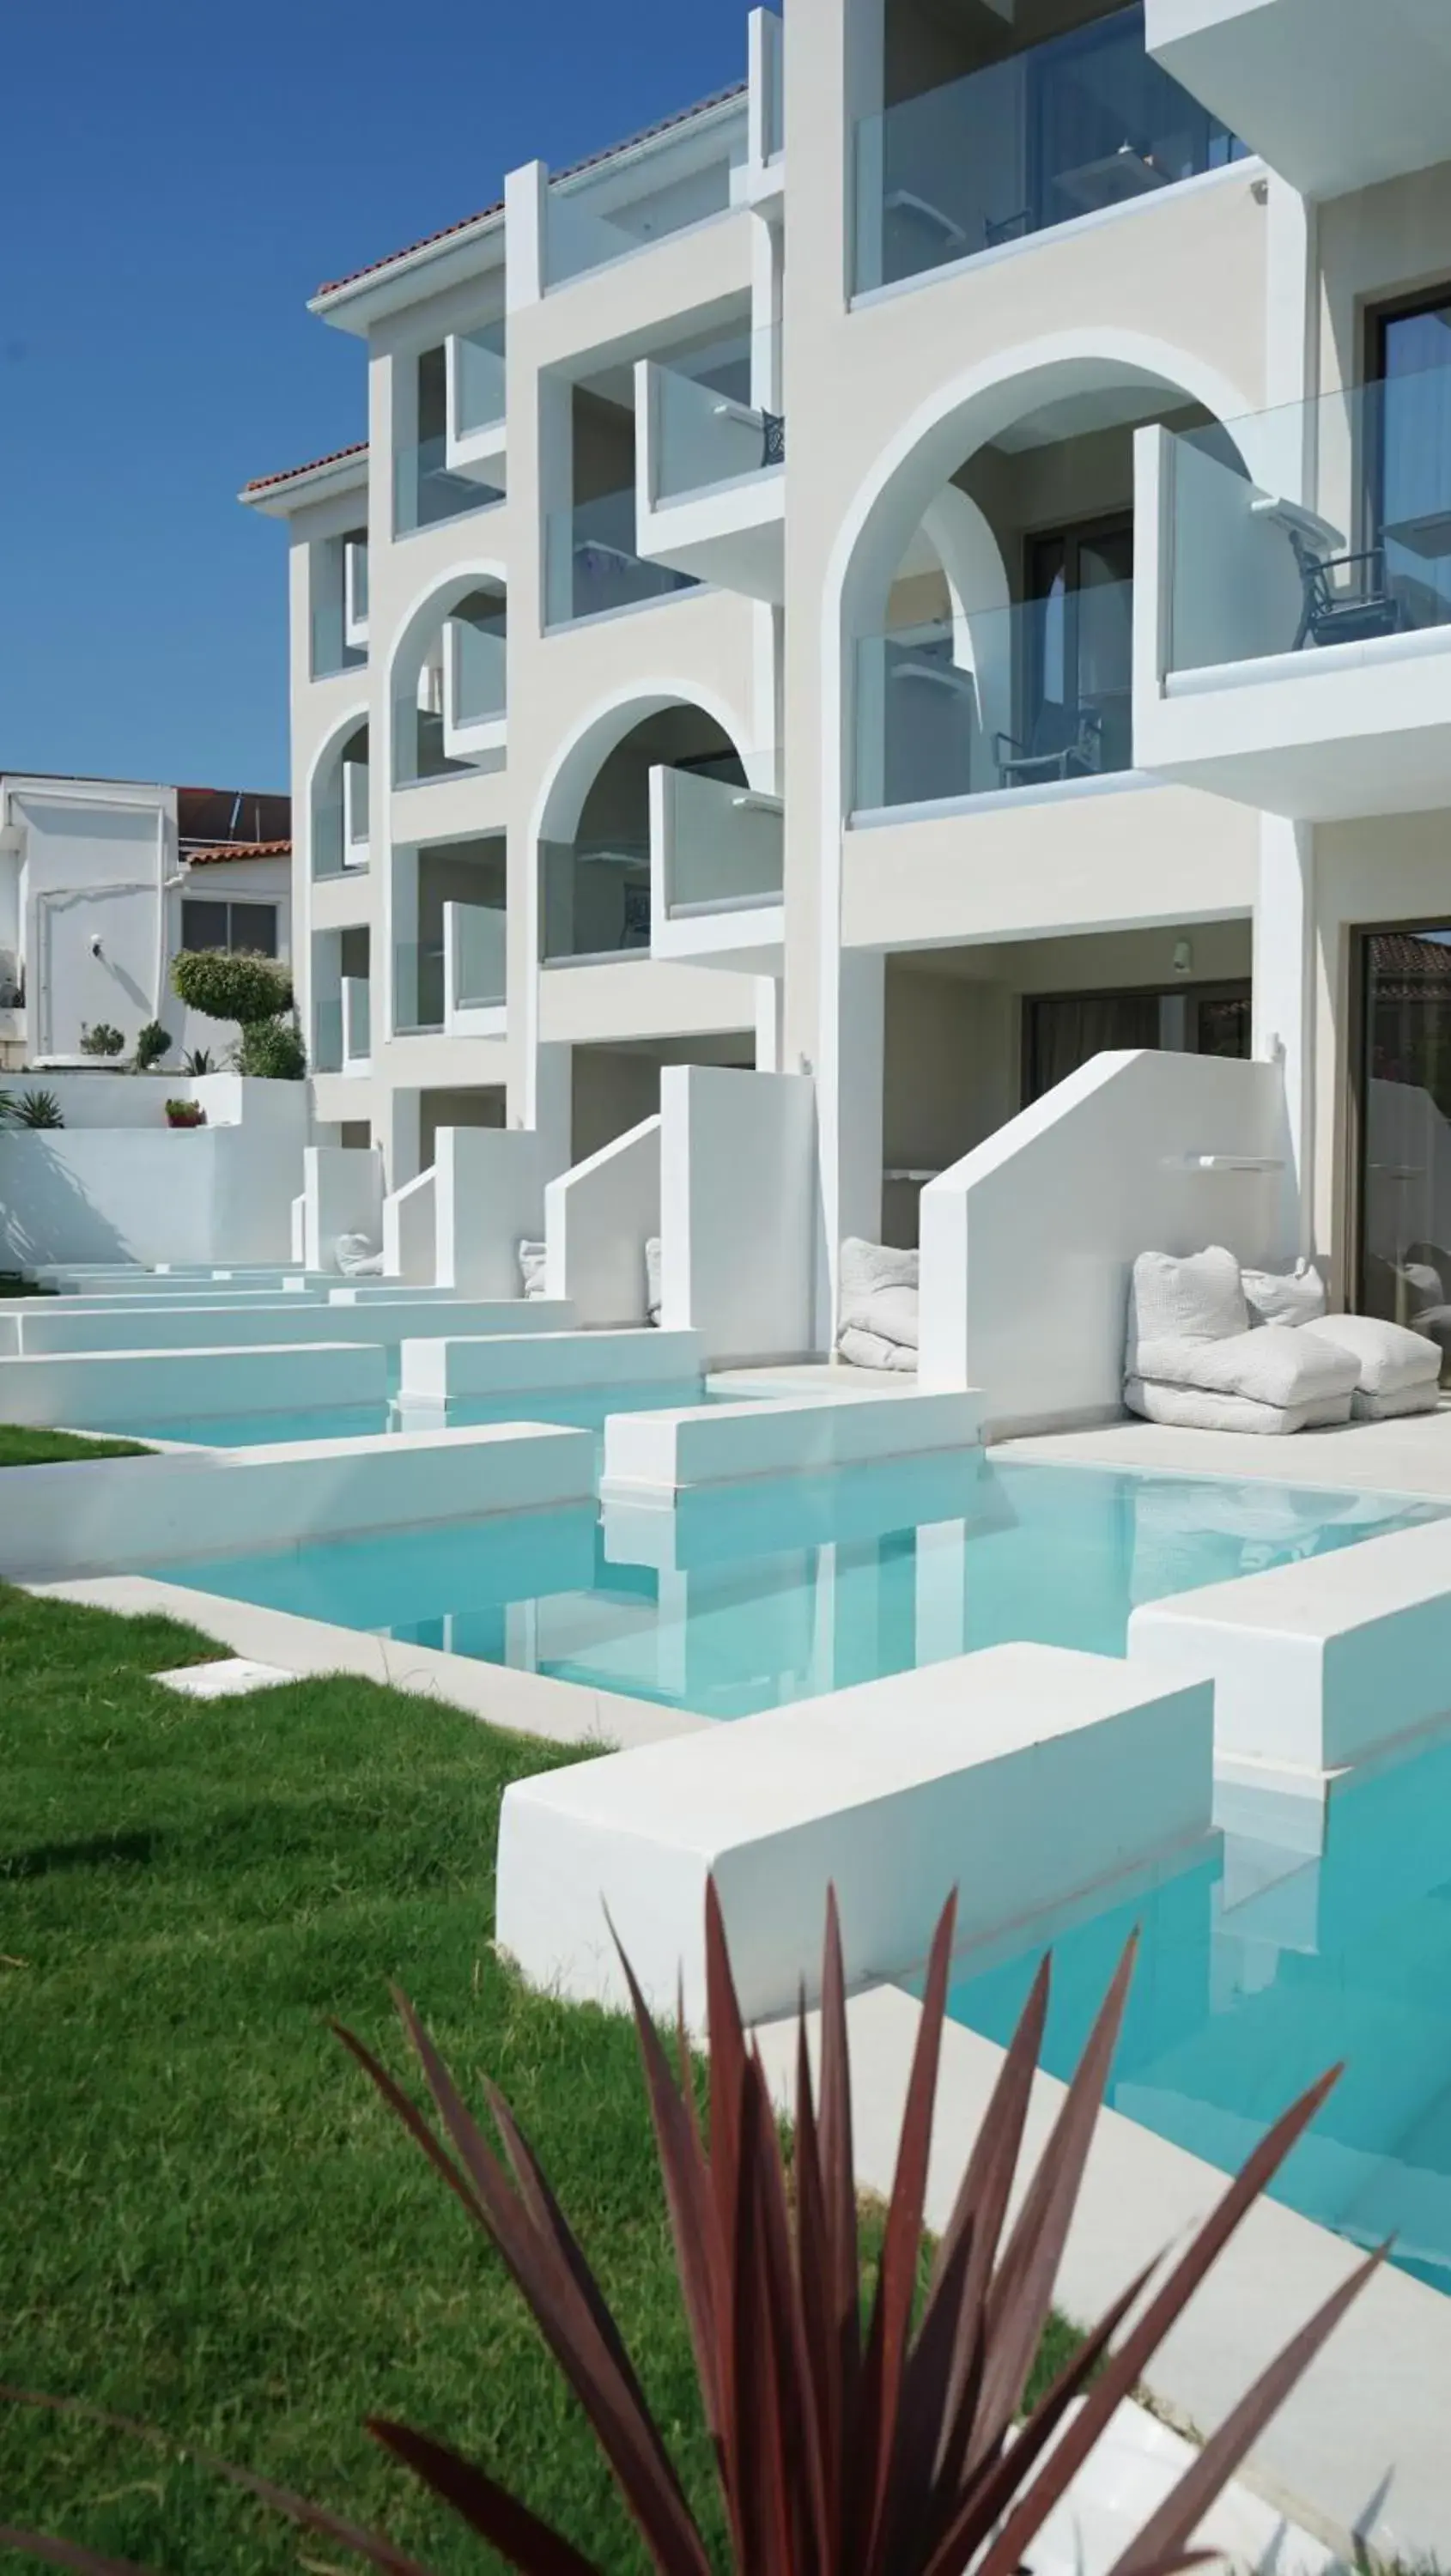 Property building, Swimming Pool in Diana Palace Hotel